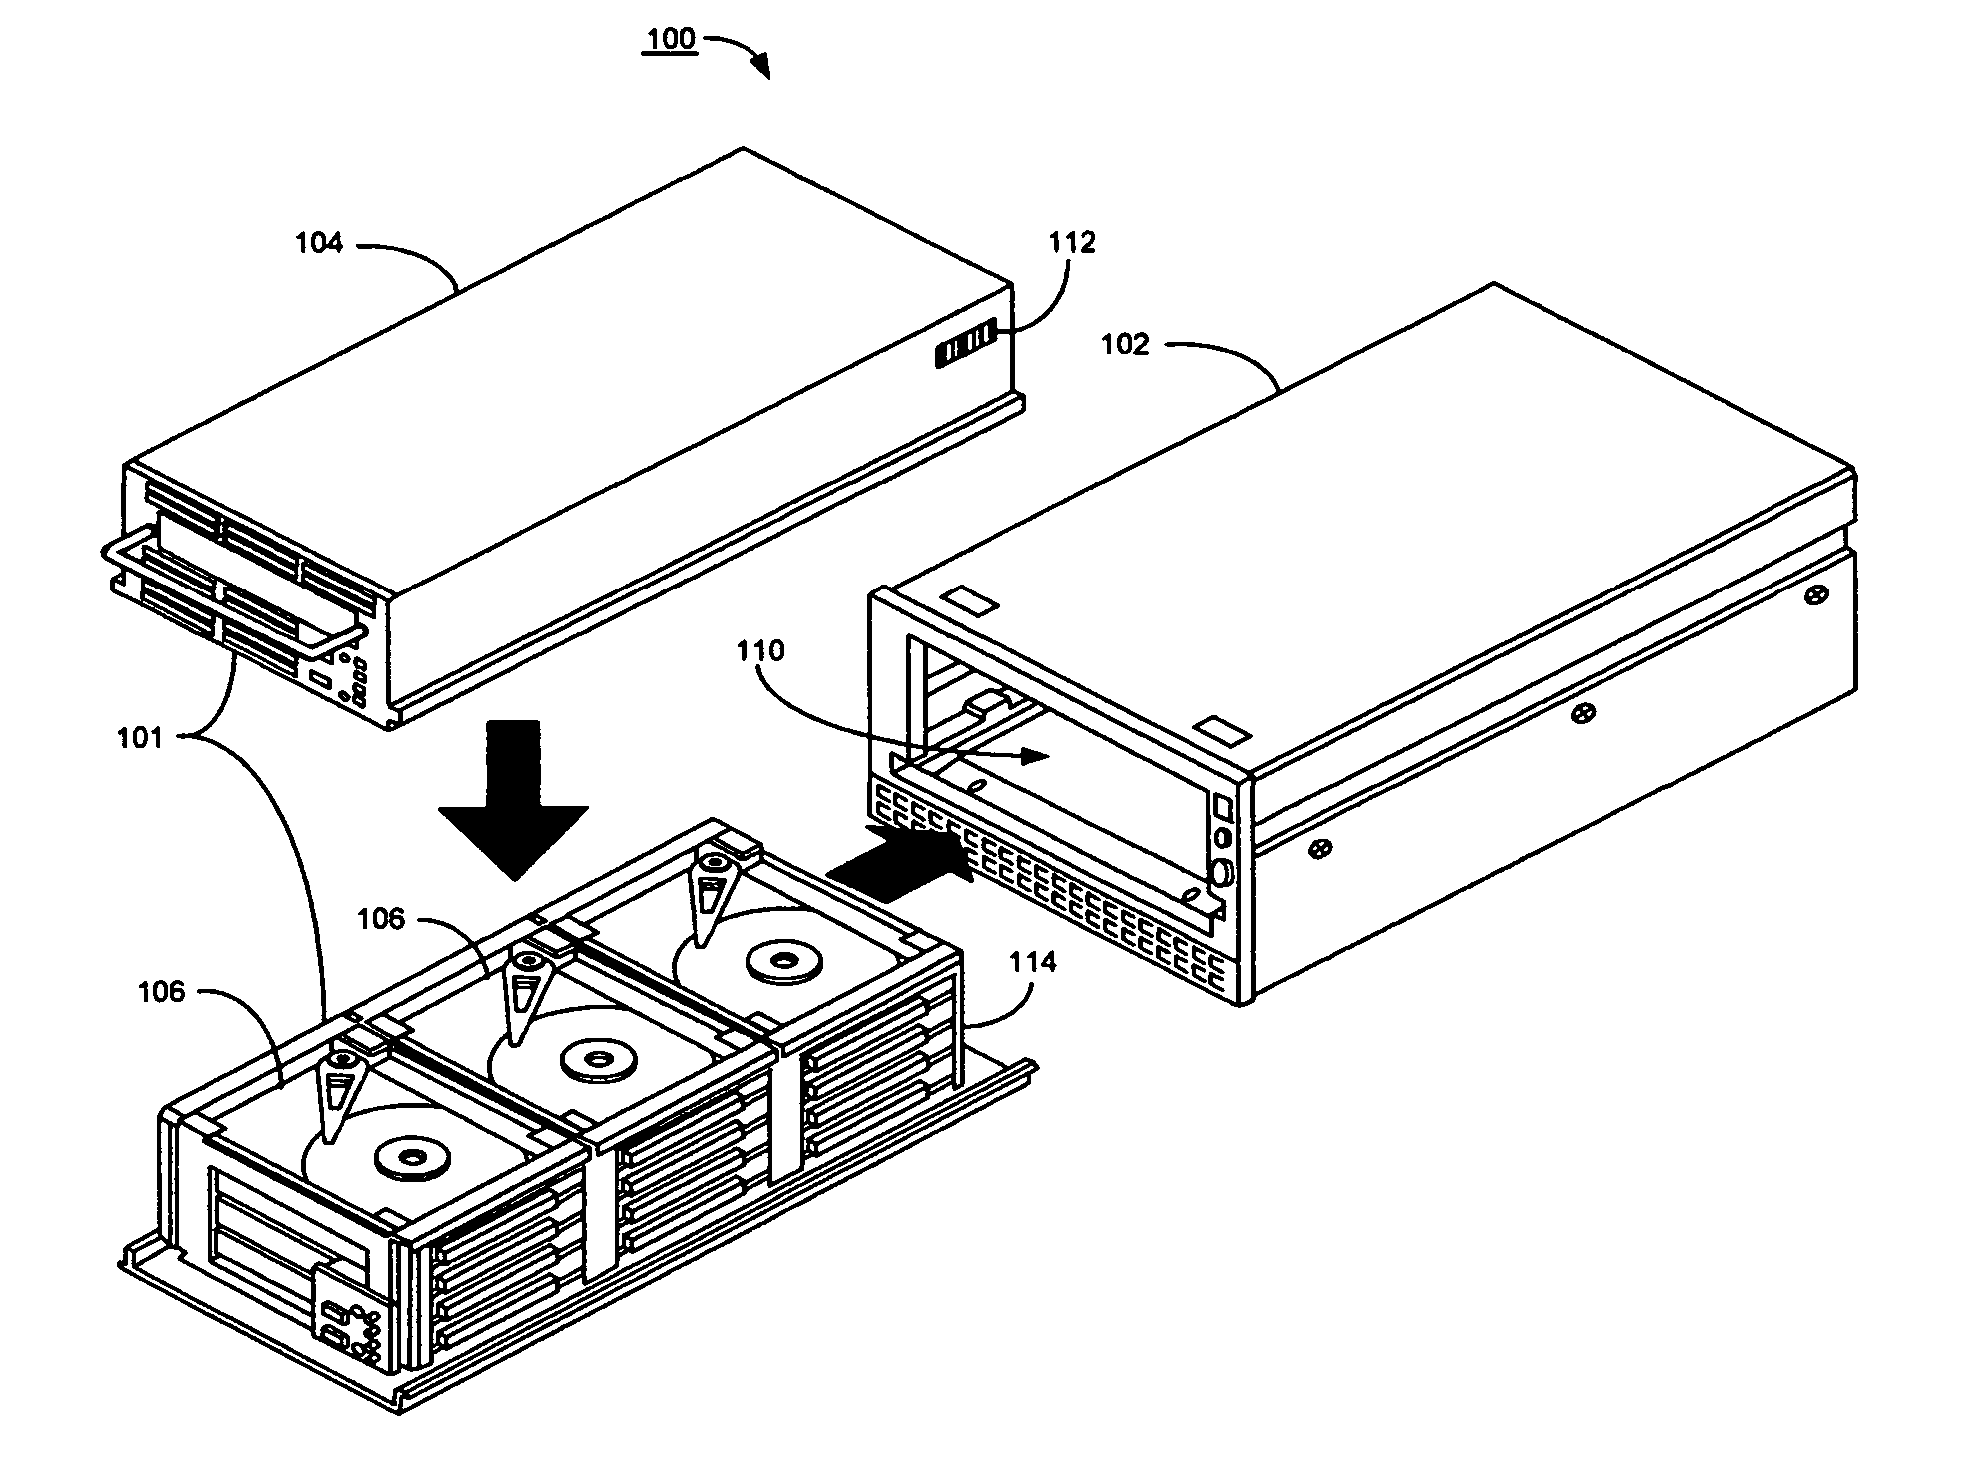 Spring based continuity alignment apparatus and method